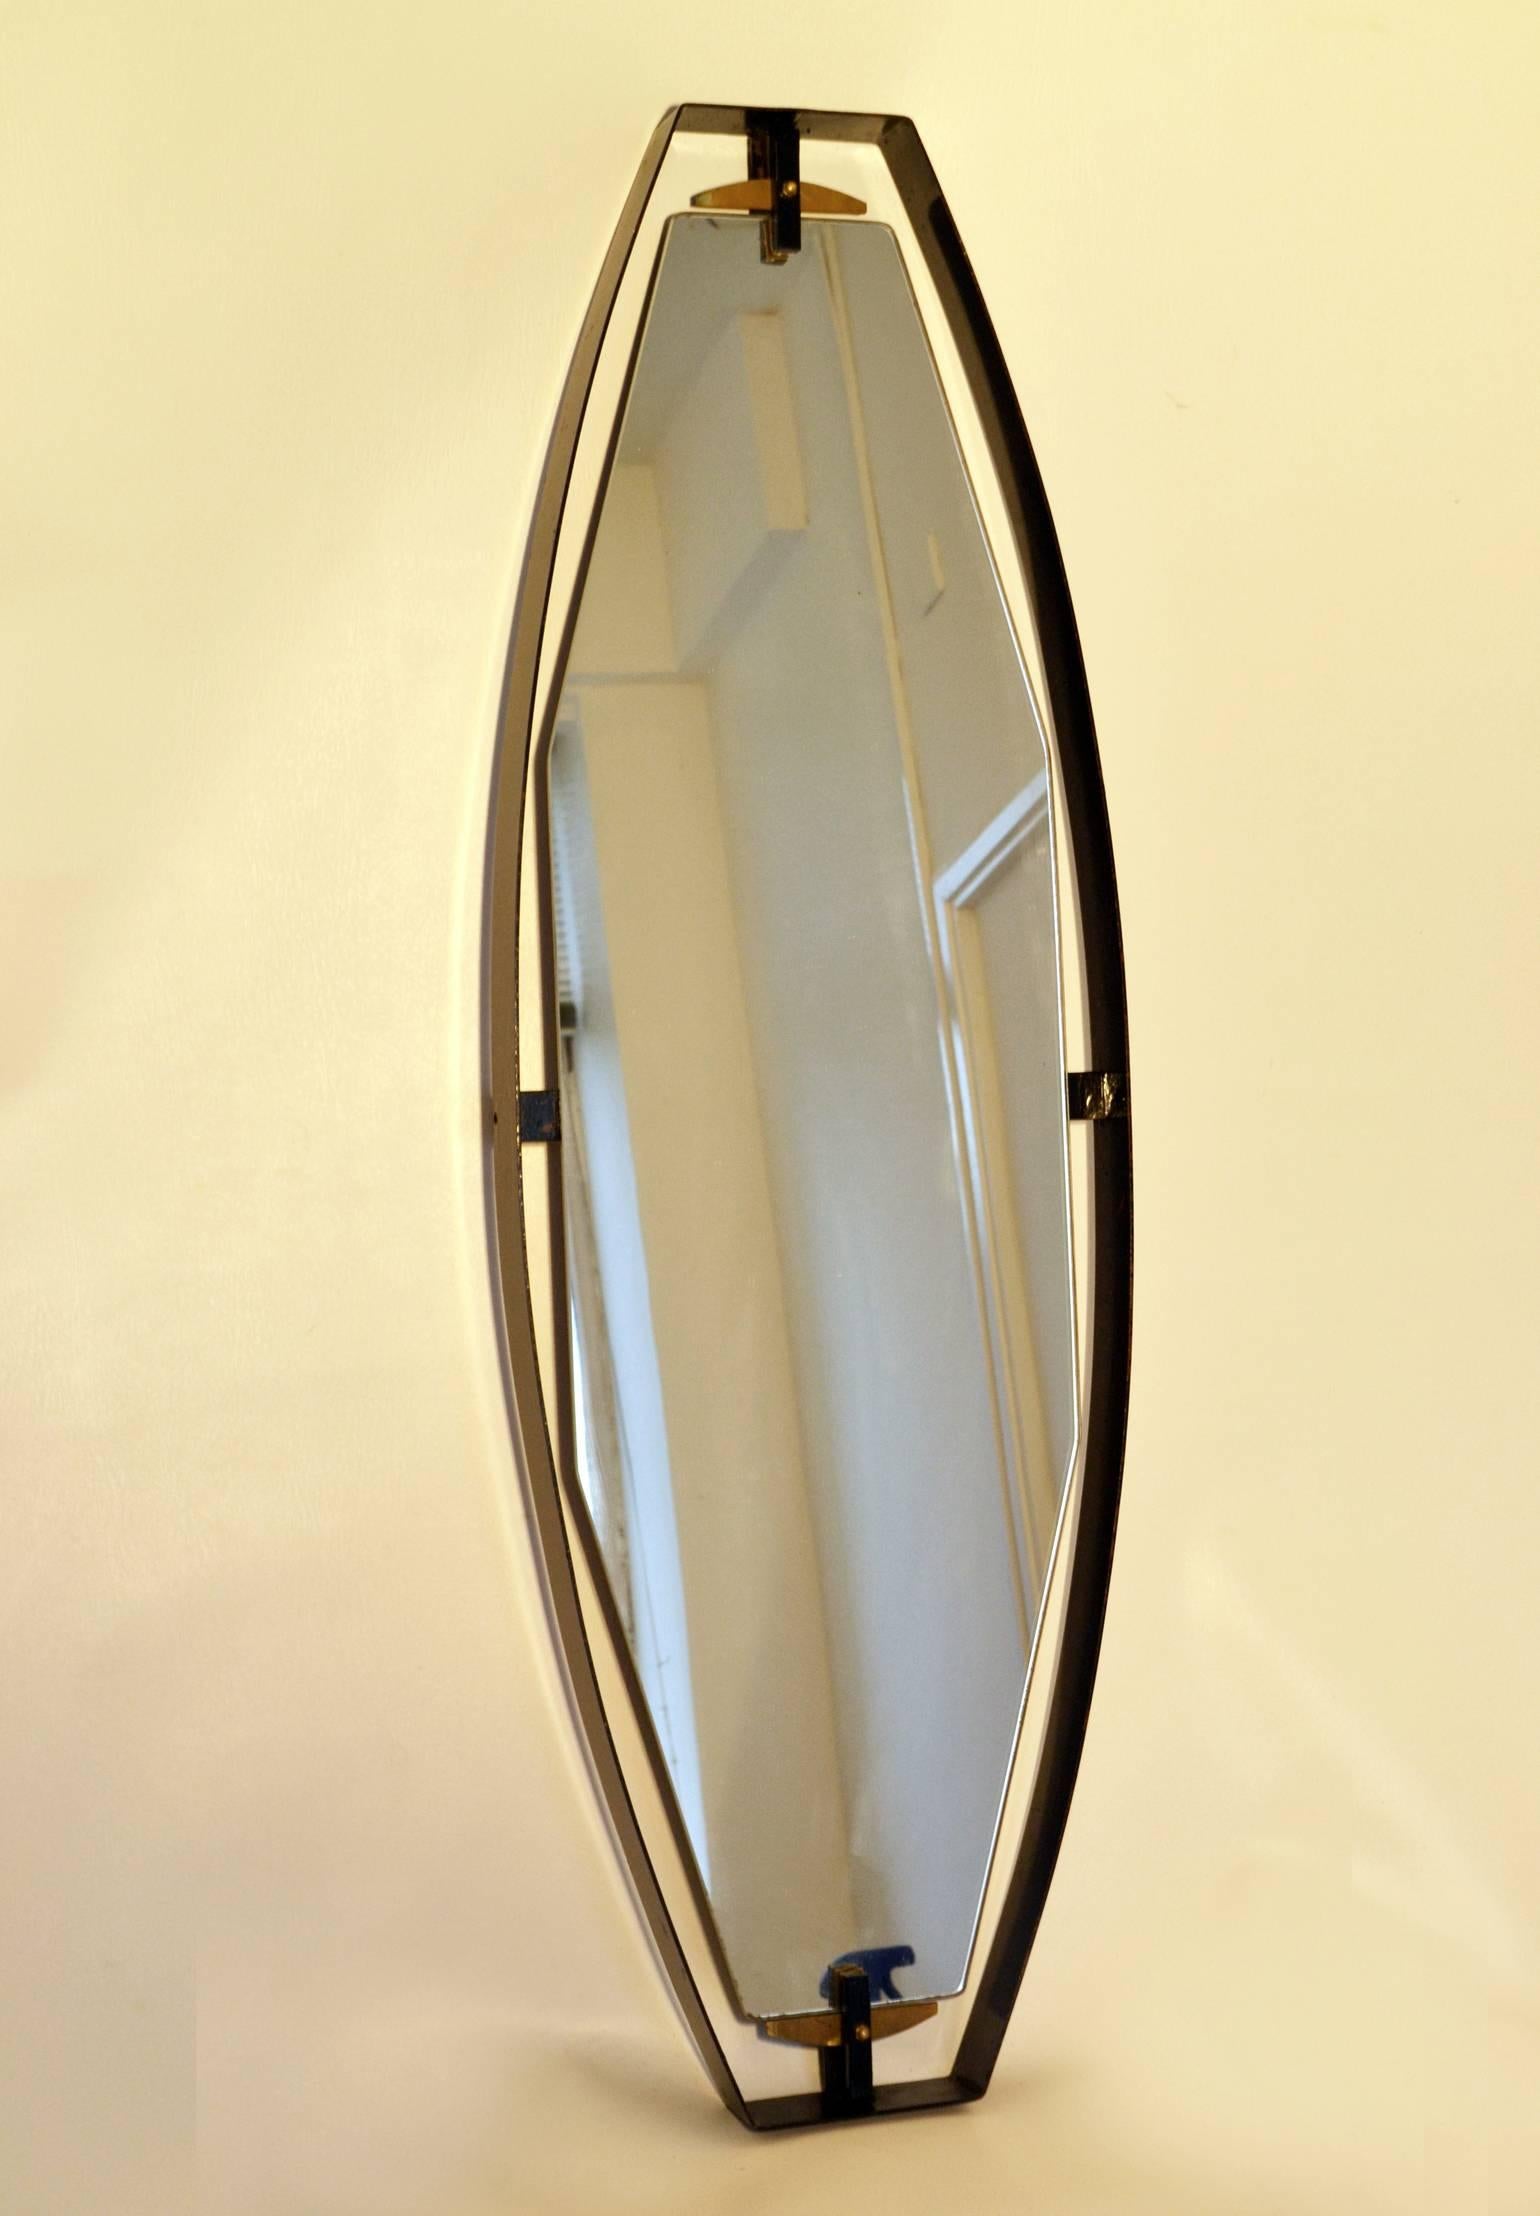 Diamond shaped full size mirrors float in a curvaceous black metal frame. The sculptural form is held together by brass and metal fittings details from above and below. The glass is original and marked.
The black border is re-powder coated.